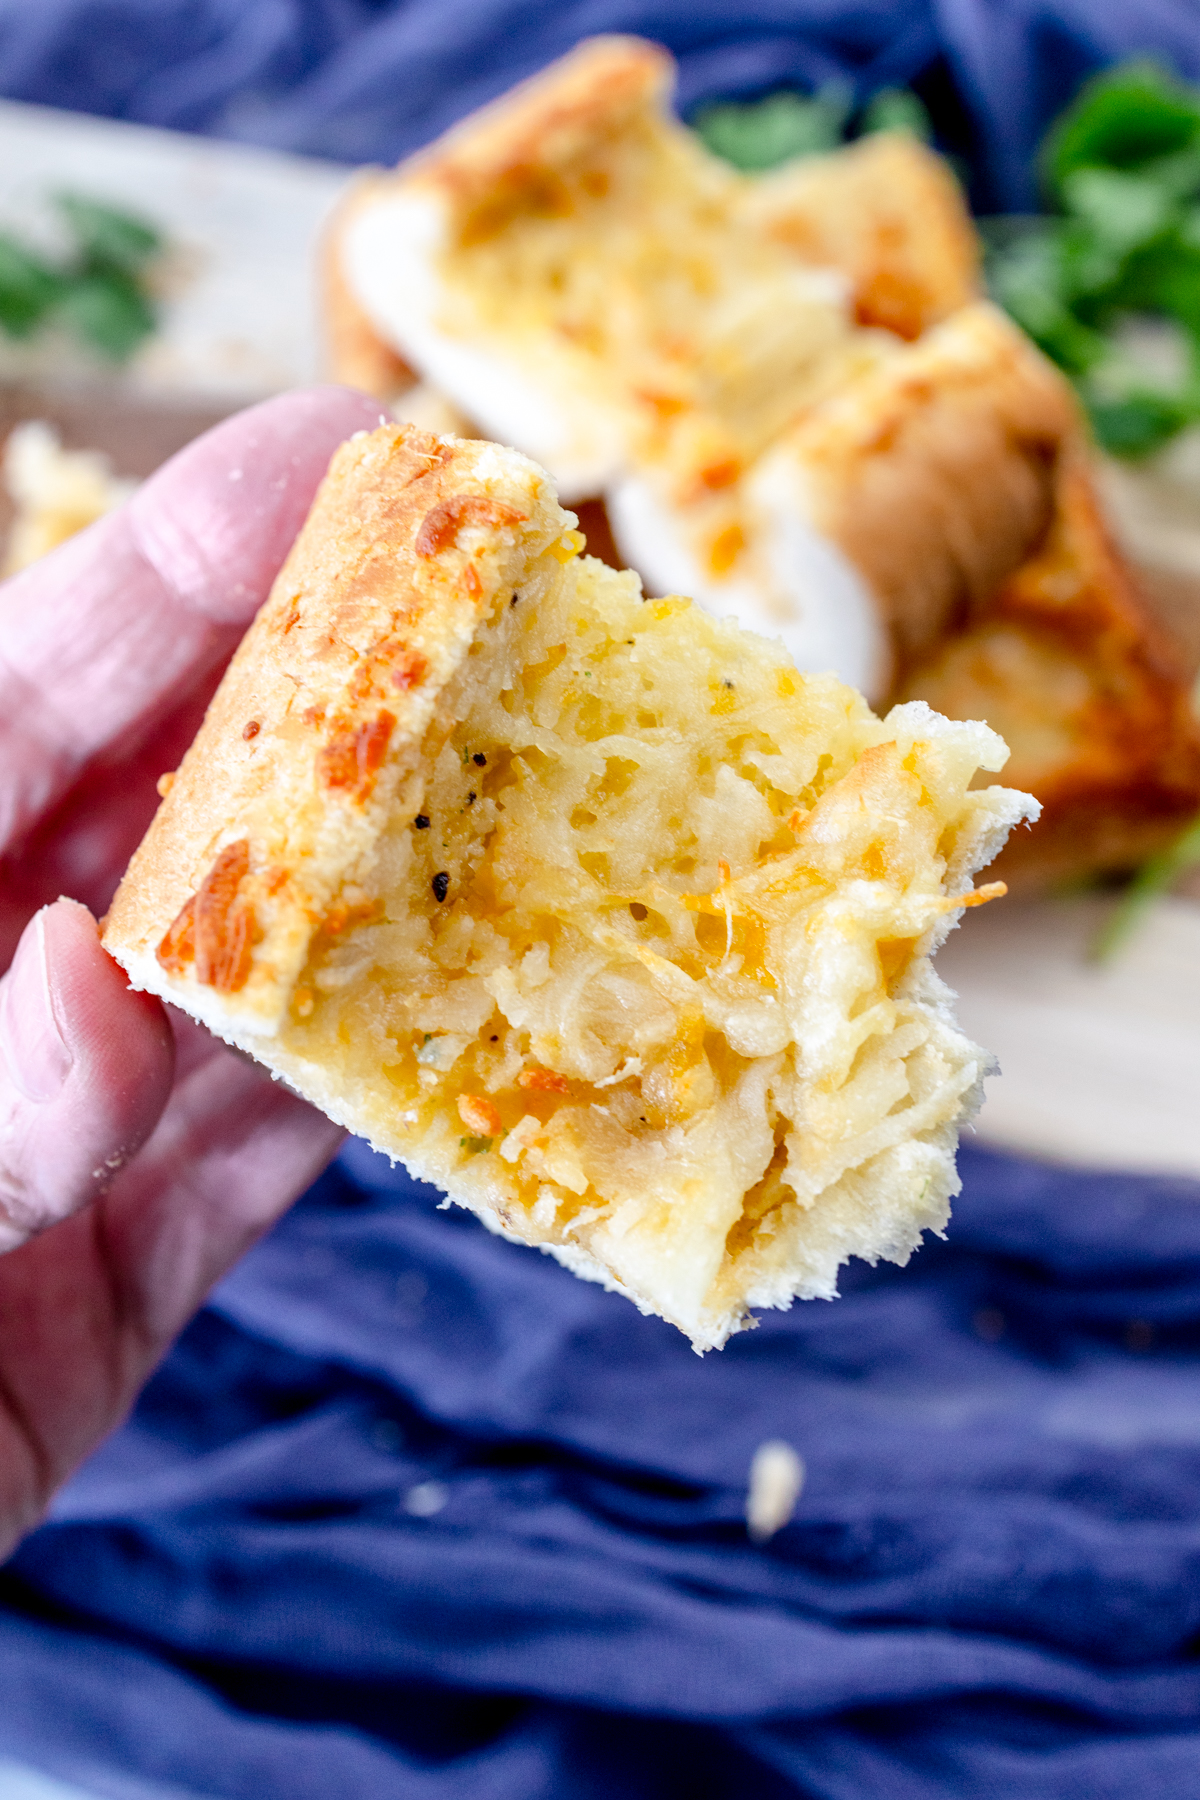 Close up image of a hand holding a slice of air fried garlic bread in front of a wooden chopping board with more garlic bread on it and fresh parsley around it for decoration.